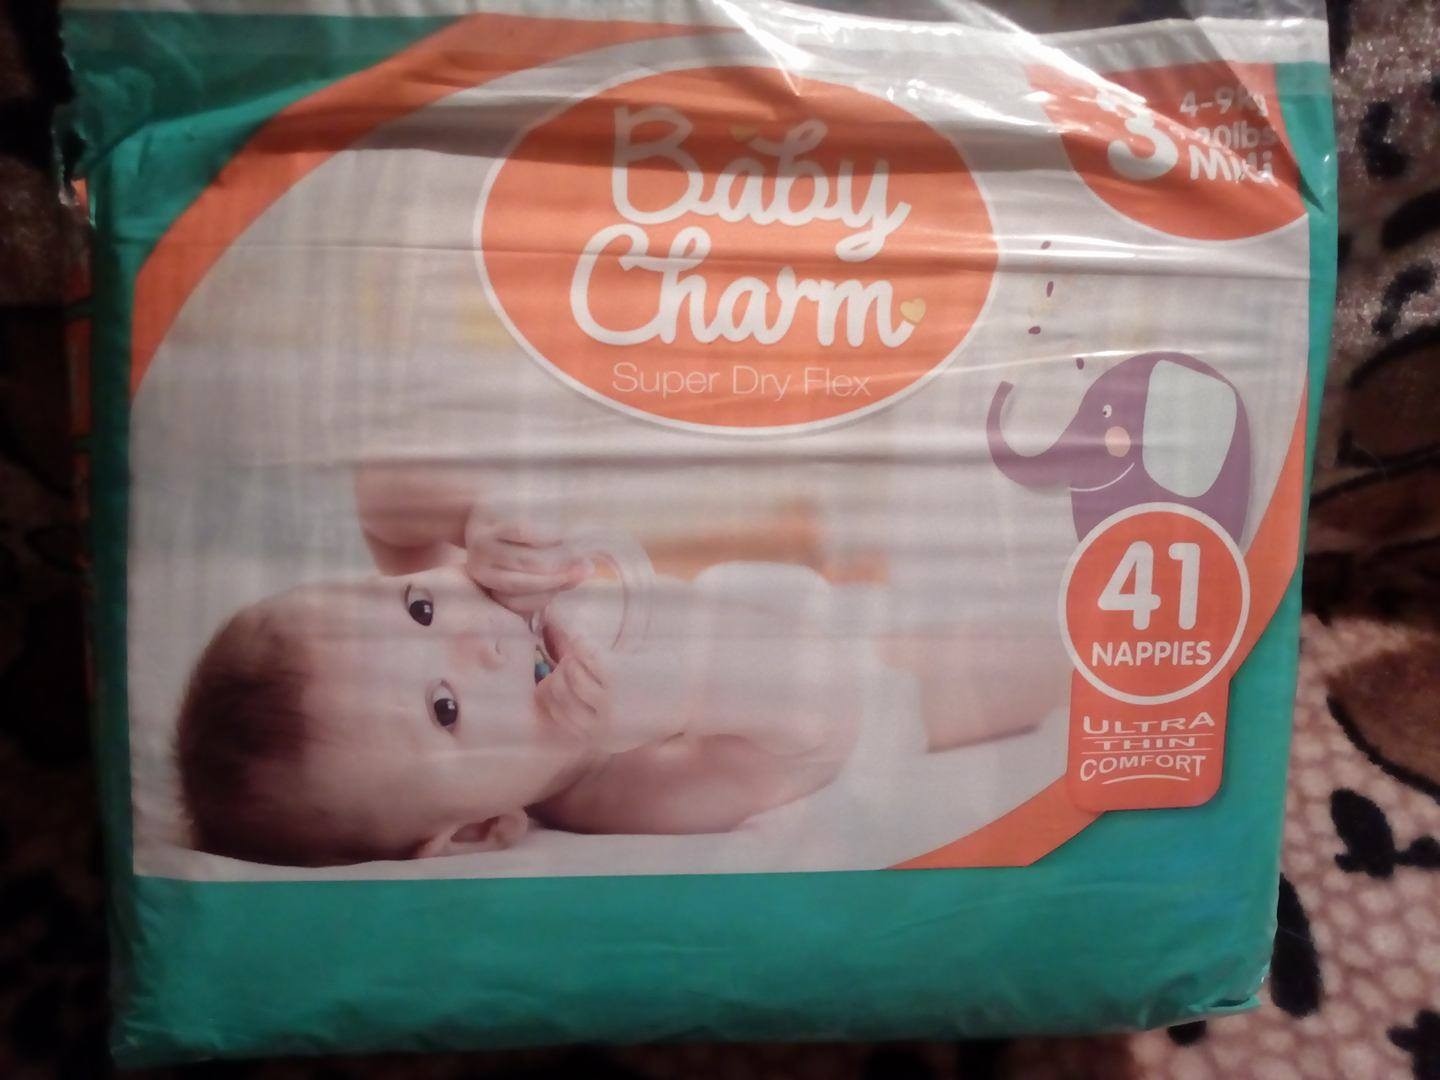 pampers toujours lidl